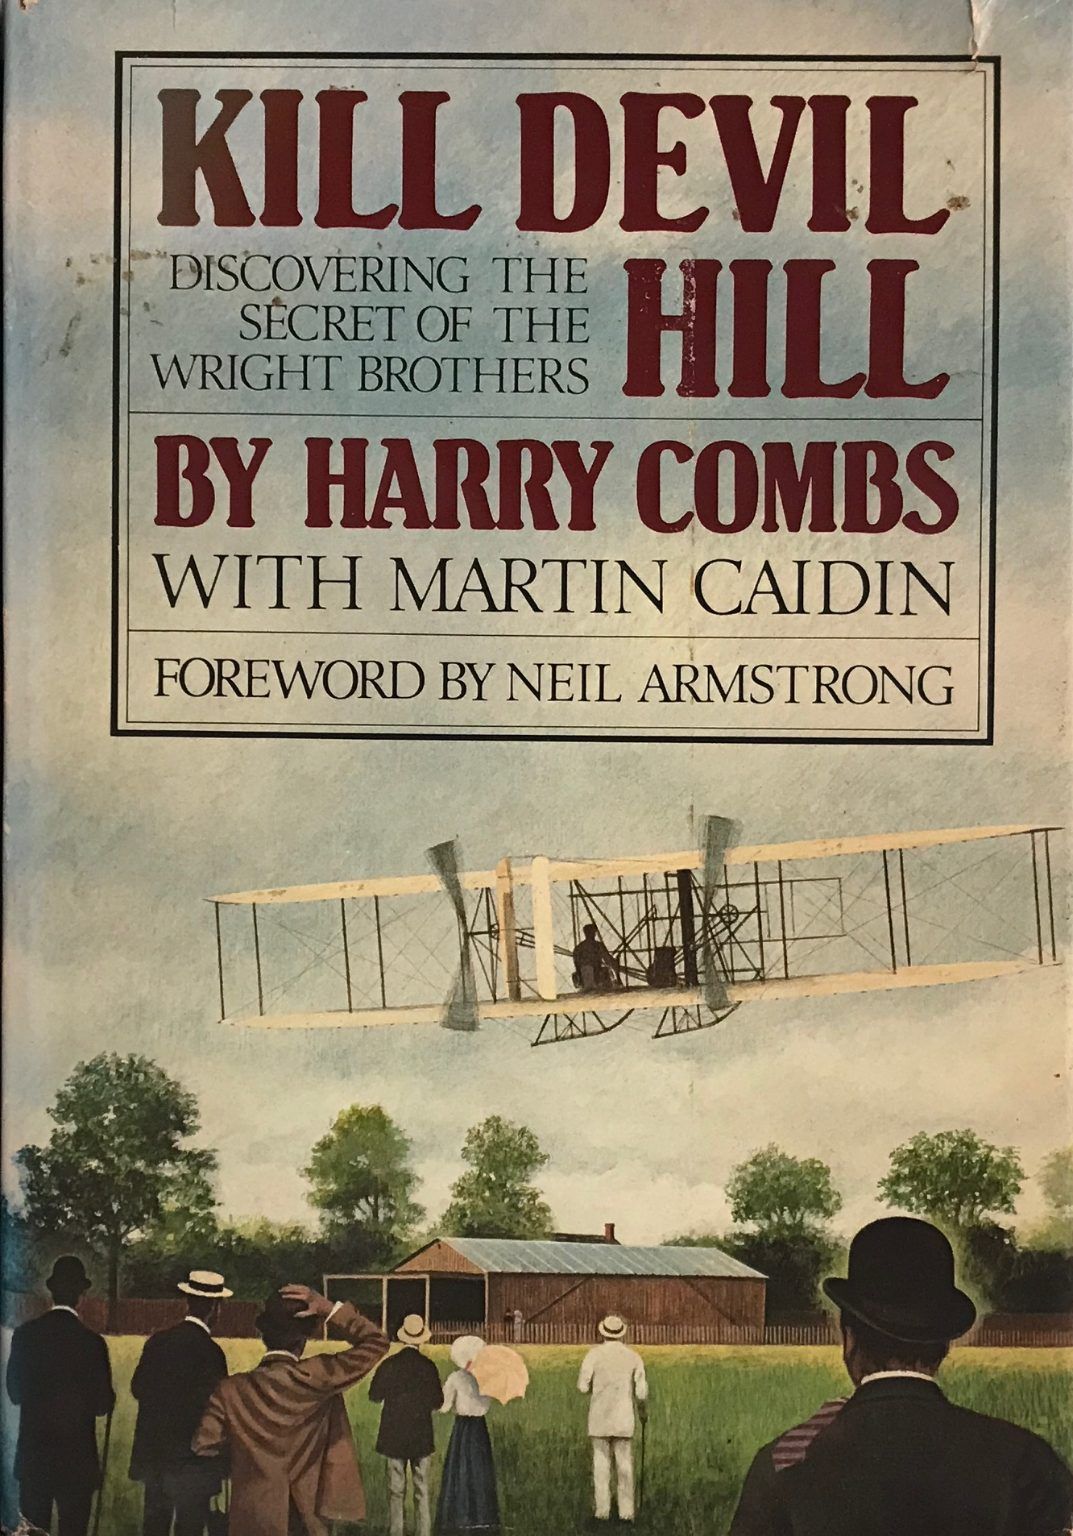 KILL DEVIL HILL: Discovering the secret of The Wright Brothers